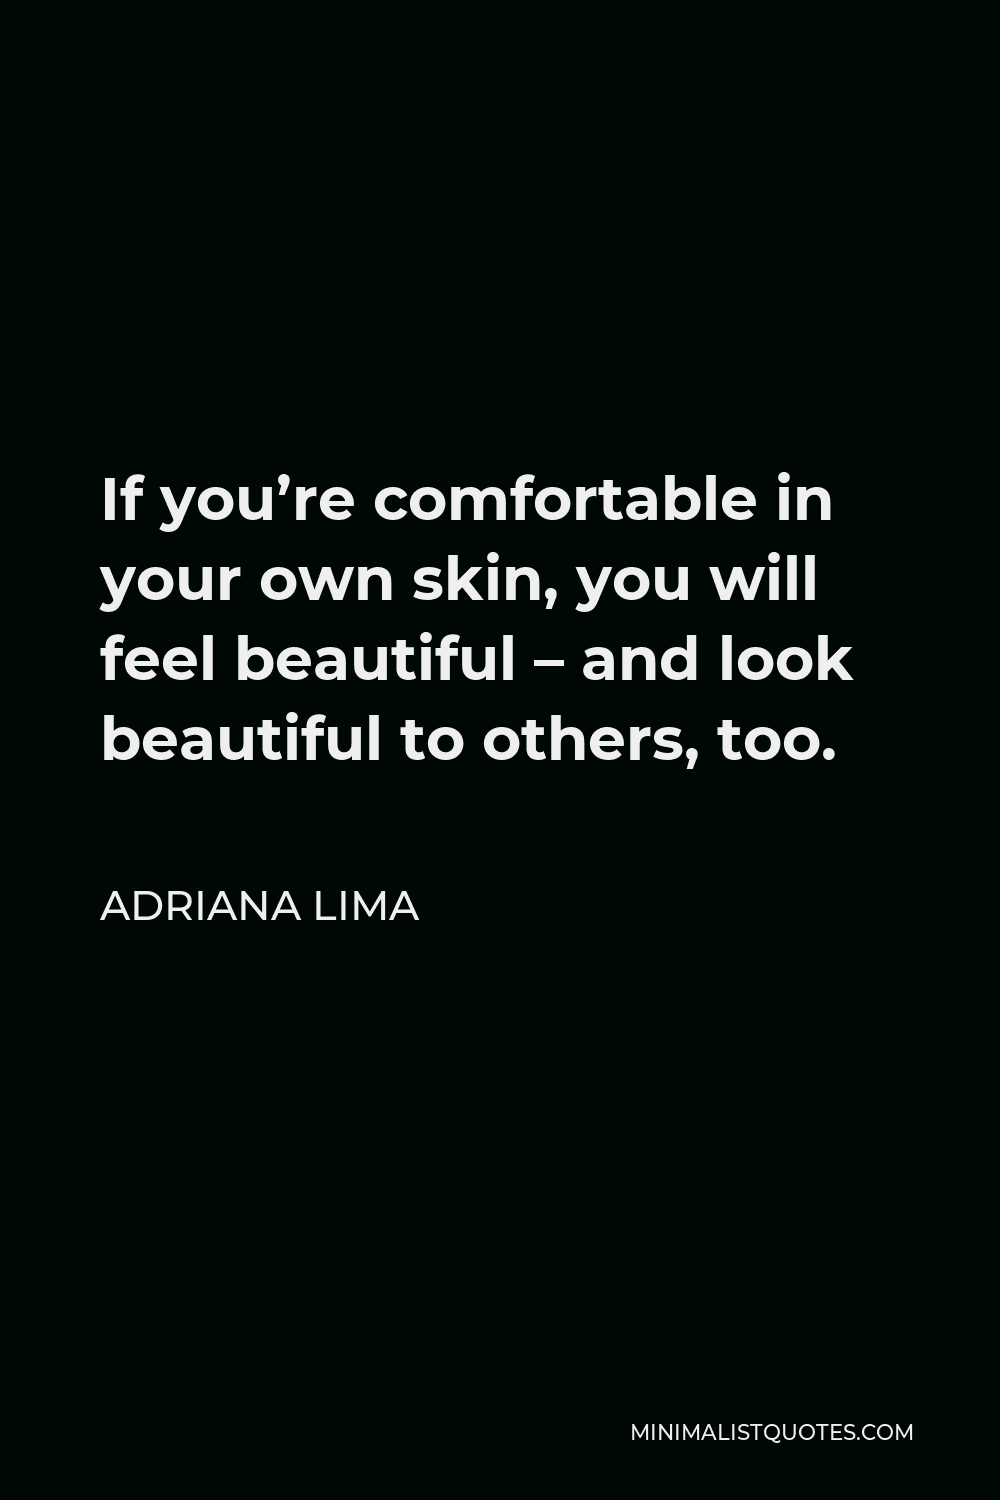 Adriana Lima Quote - If you’re comfortable in your own skin, you will feel beautiful – and look beautiful to others, too.